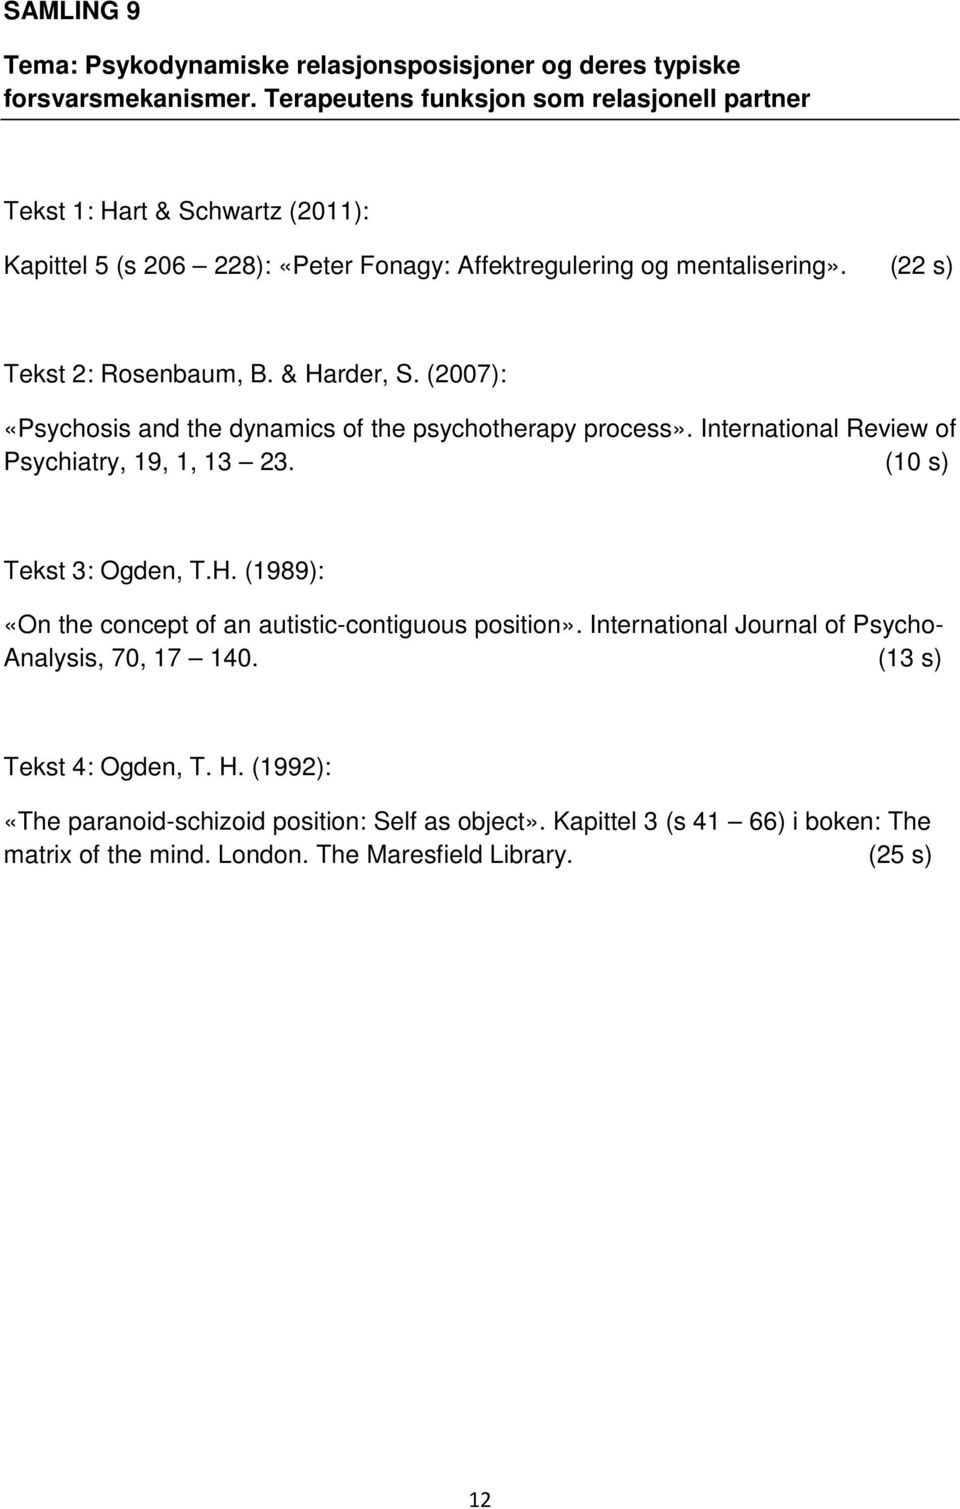 & Harder, S. (2007): «Psychosis and the dynamics of the psychotherapy process». International Review of Psychiatry, 19, 1, 13 23. (10 s) Tekst 3: Ogden, T.H. (1989): «On the concept of an autistic-contiguous position».